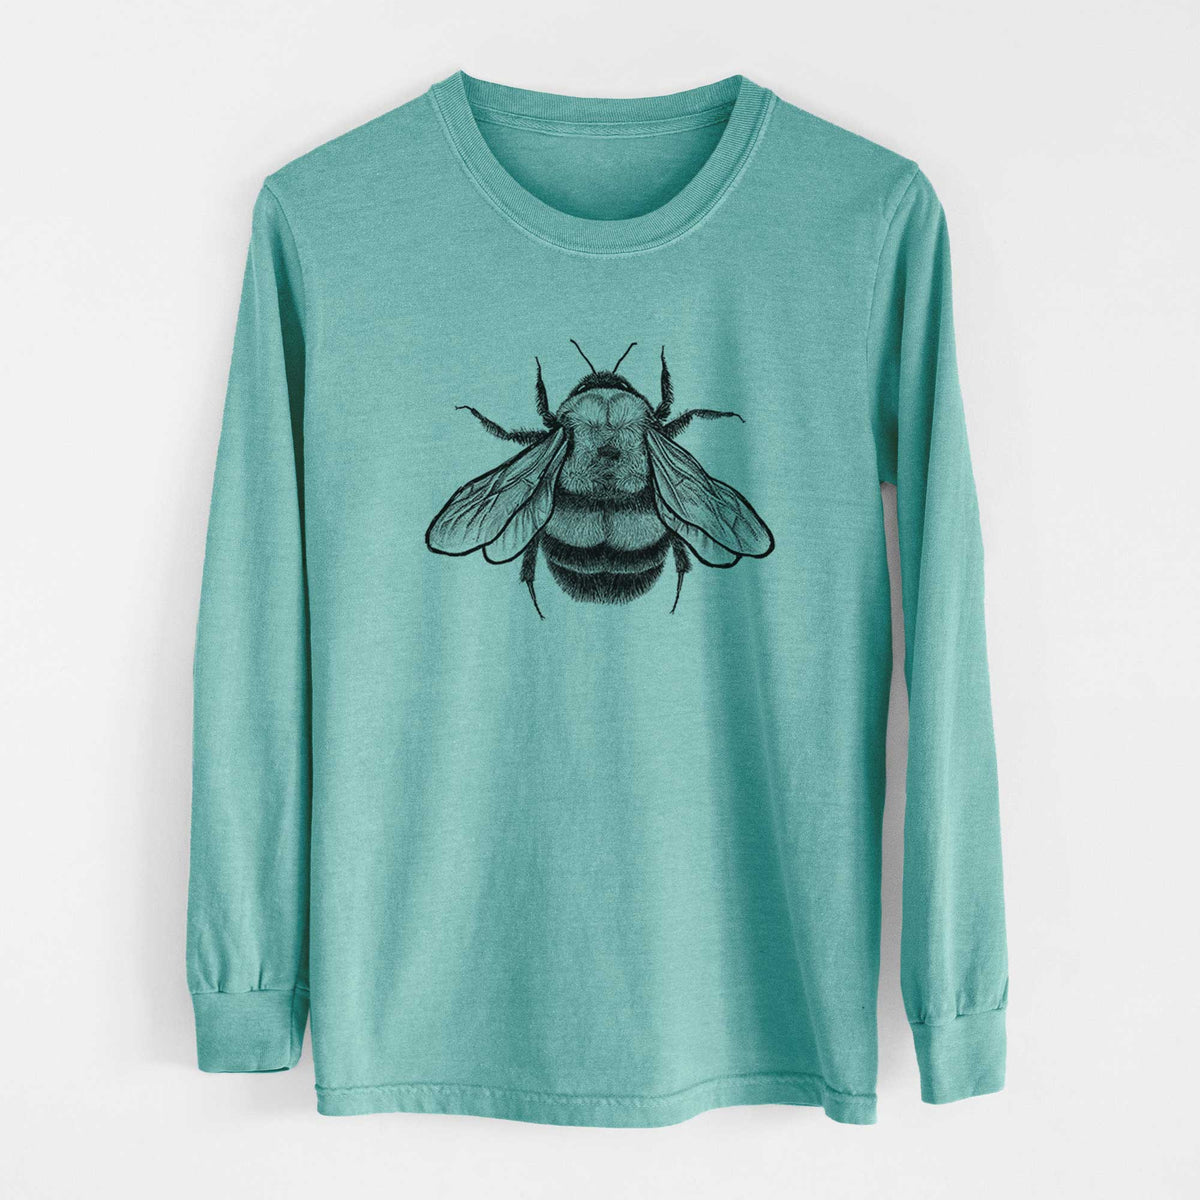 Bombus Affinis - Rusty-Patched Bumble Bee - Heavyweight 100% Cotton Long Sleeve